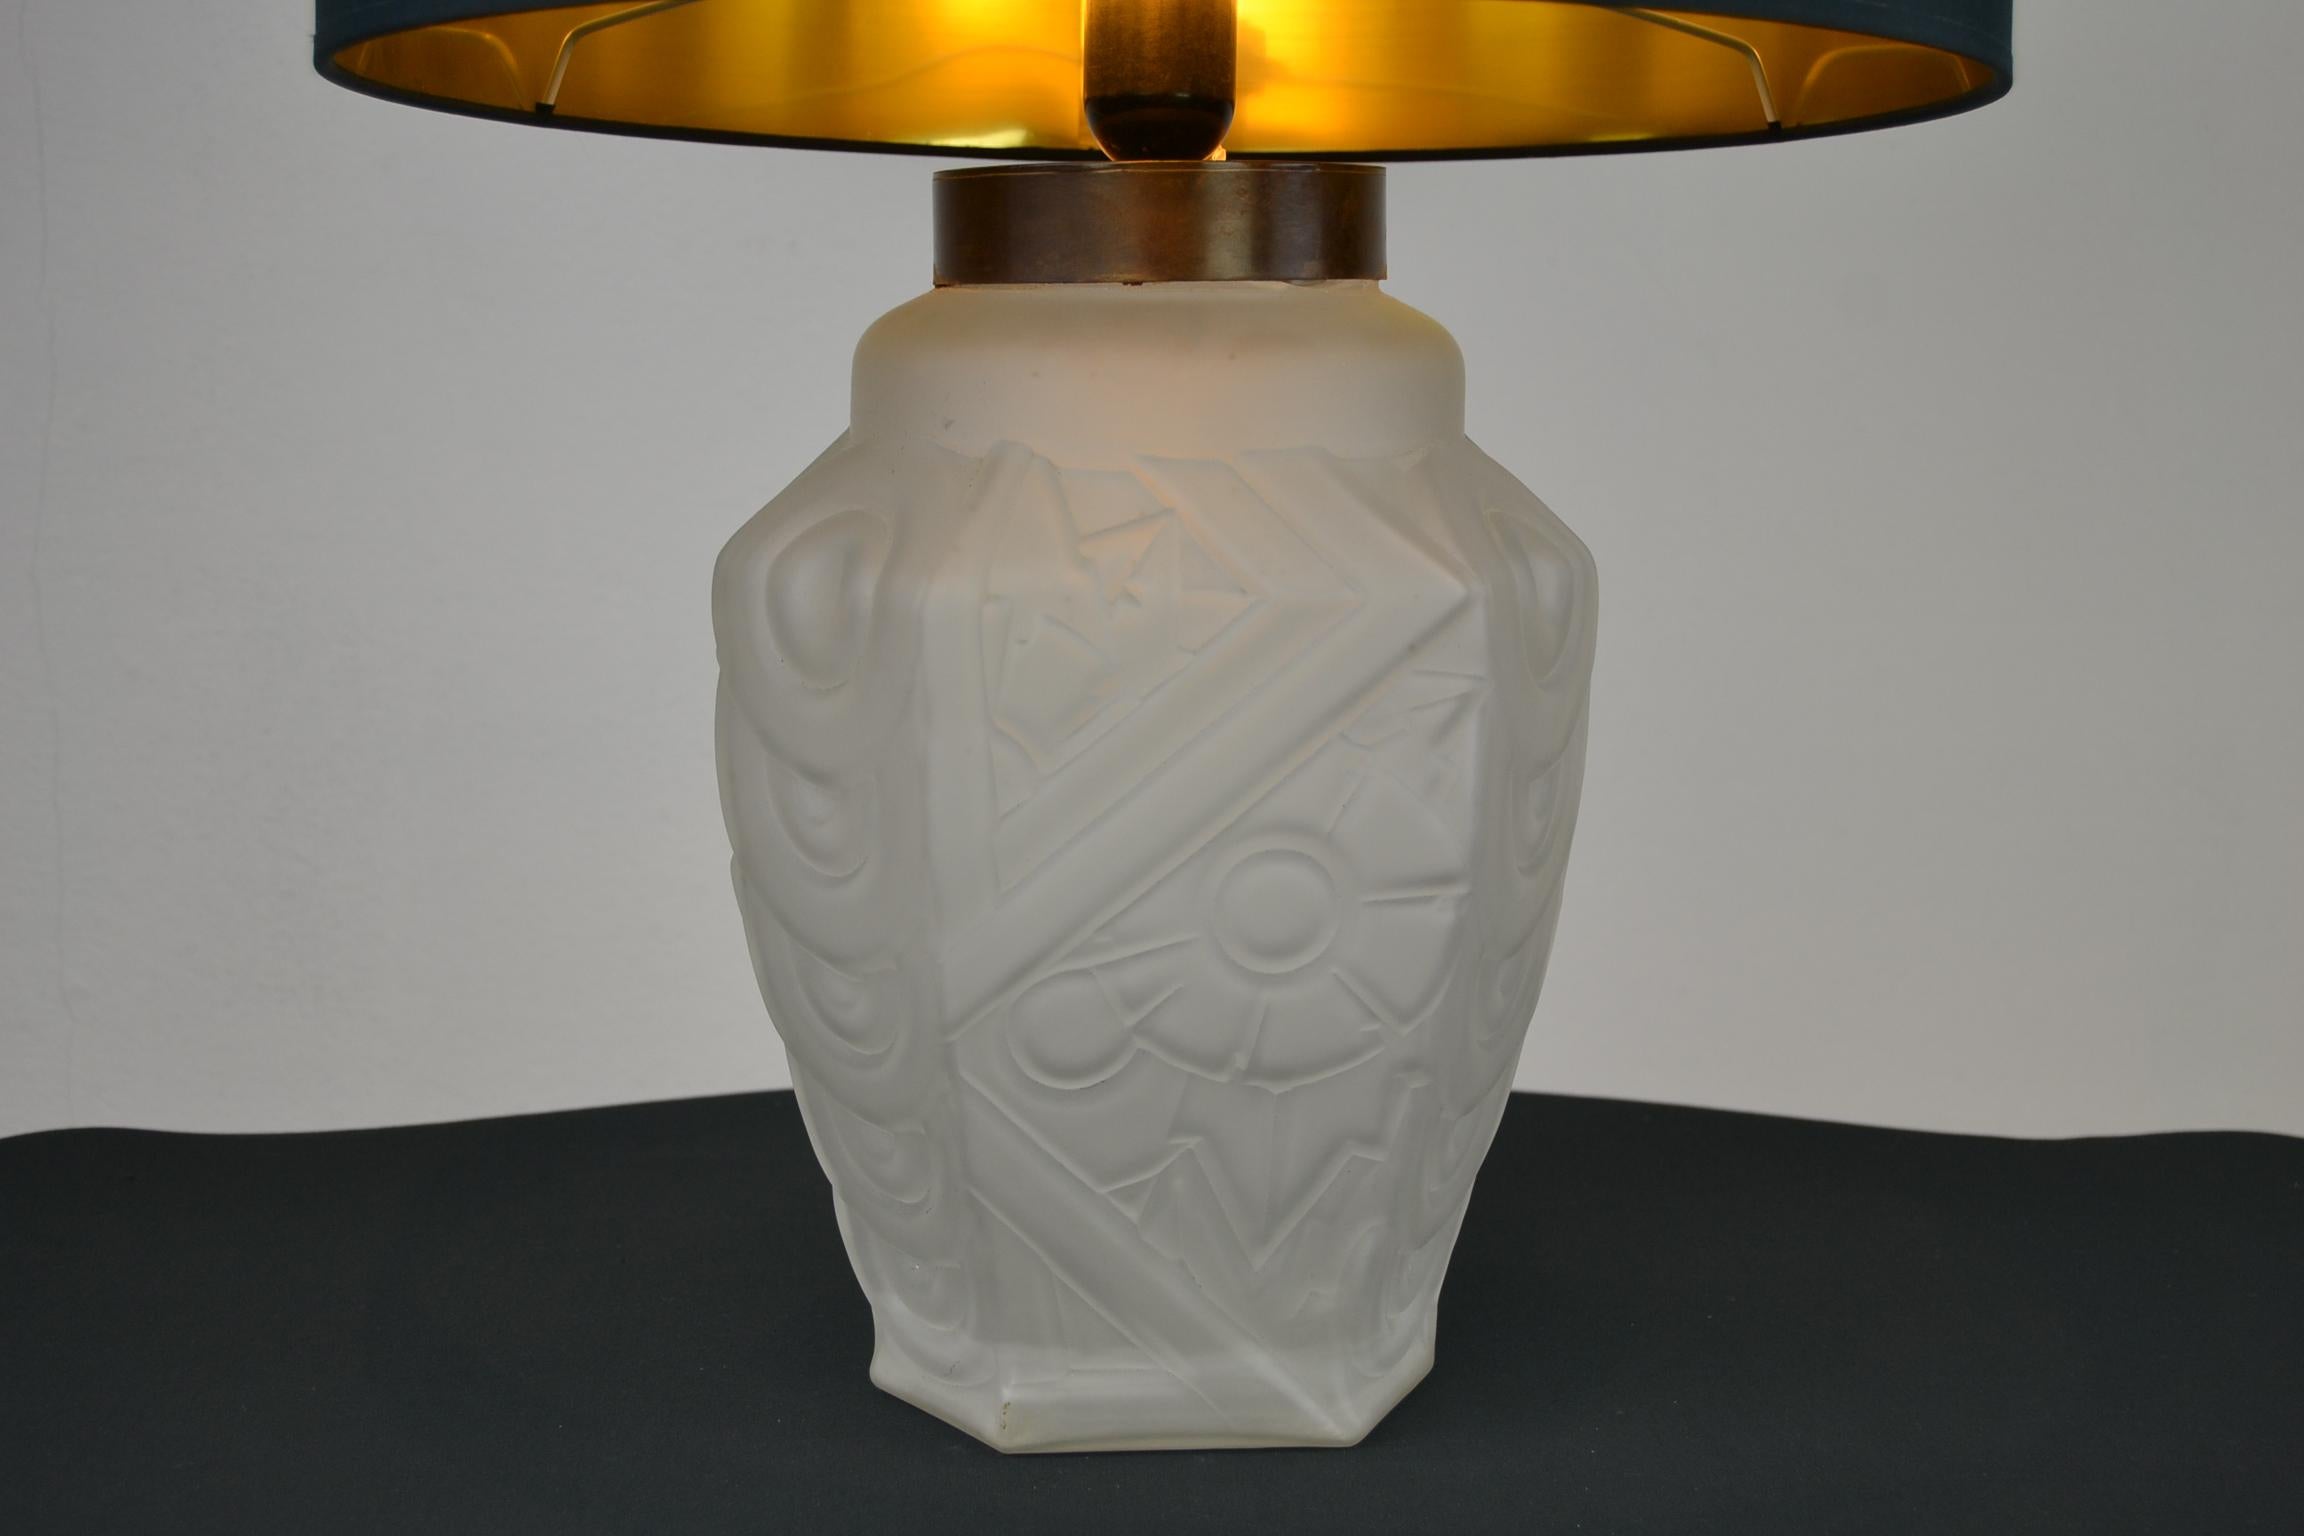 French Art Deco table lamp of frosted moulded pressed glass.
This French lamp has a Geometric Pattern in Floral style, an angular shape with 6 sides. It's in the style of Muller Frères, Degué and Lalique.
This glass lamp base has no chips or